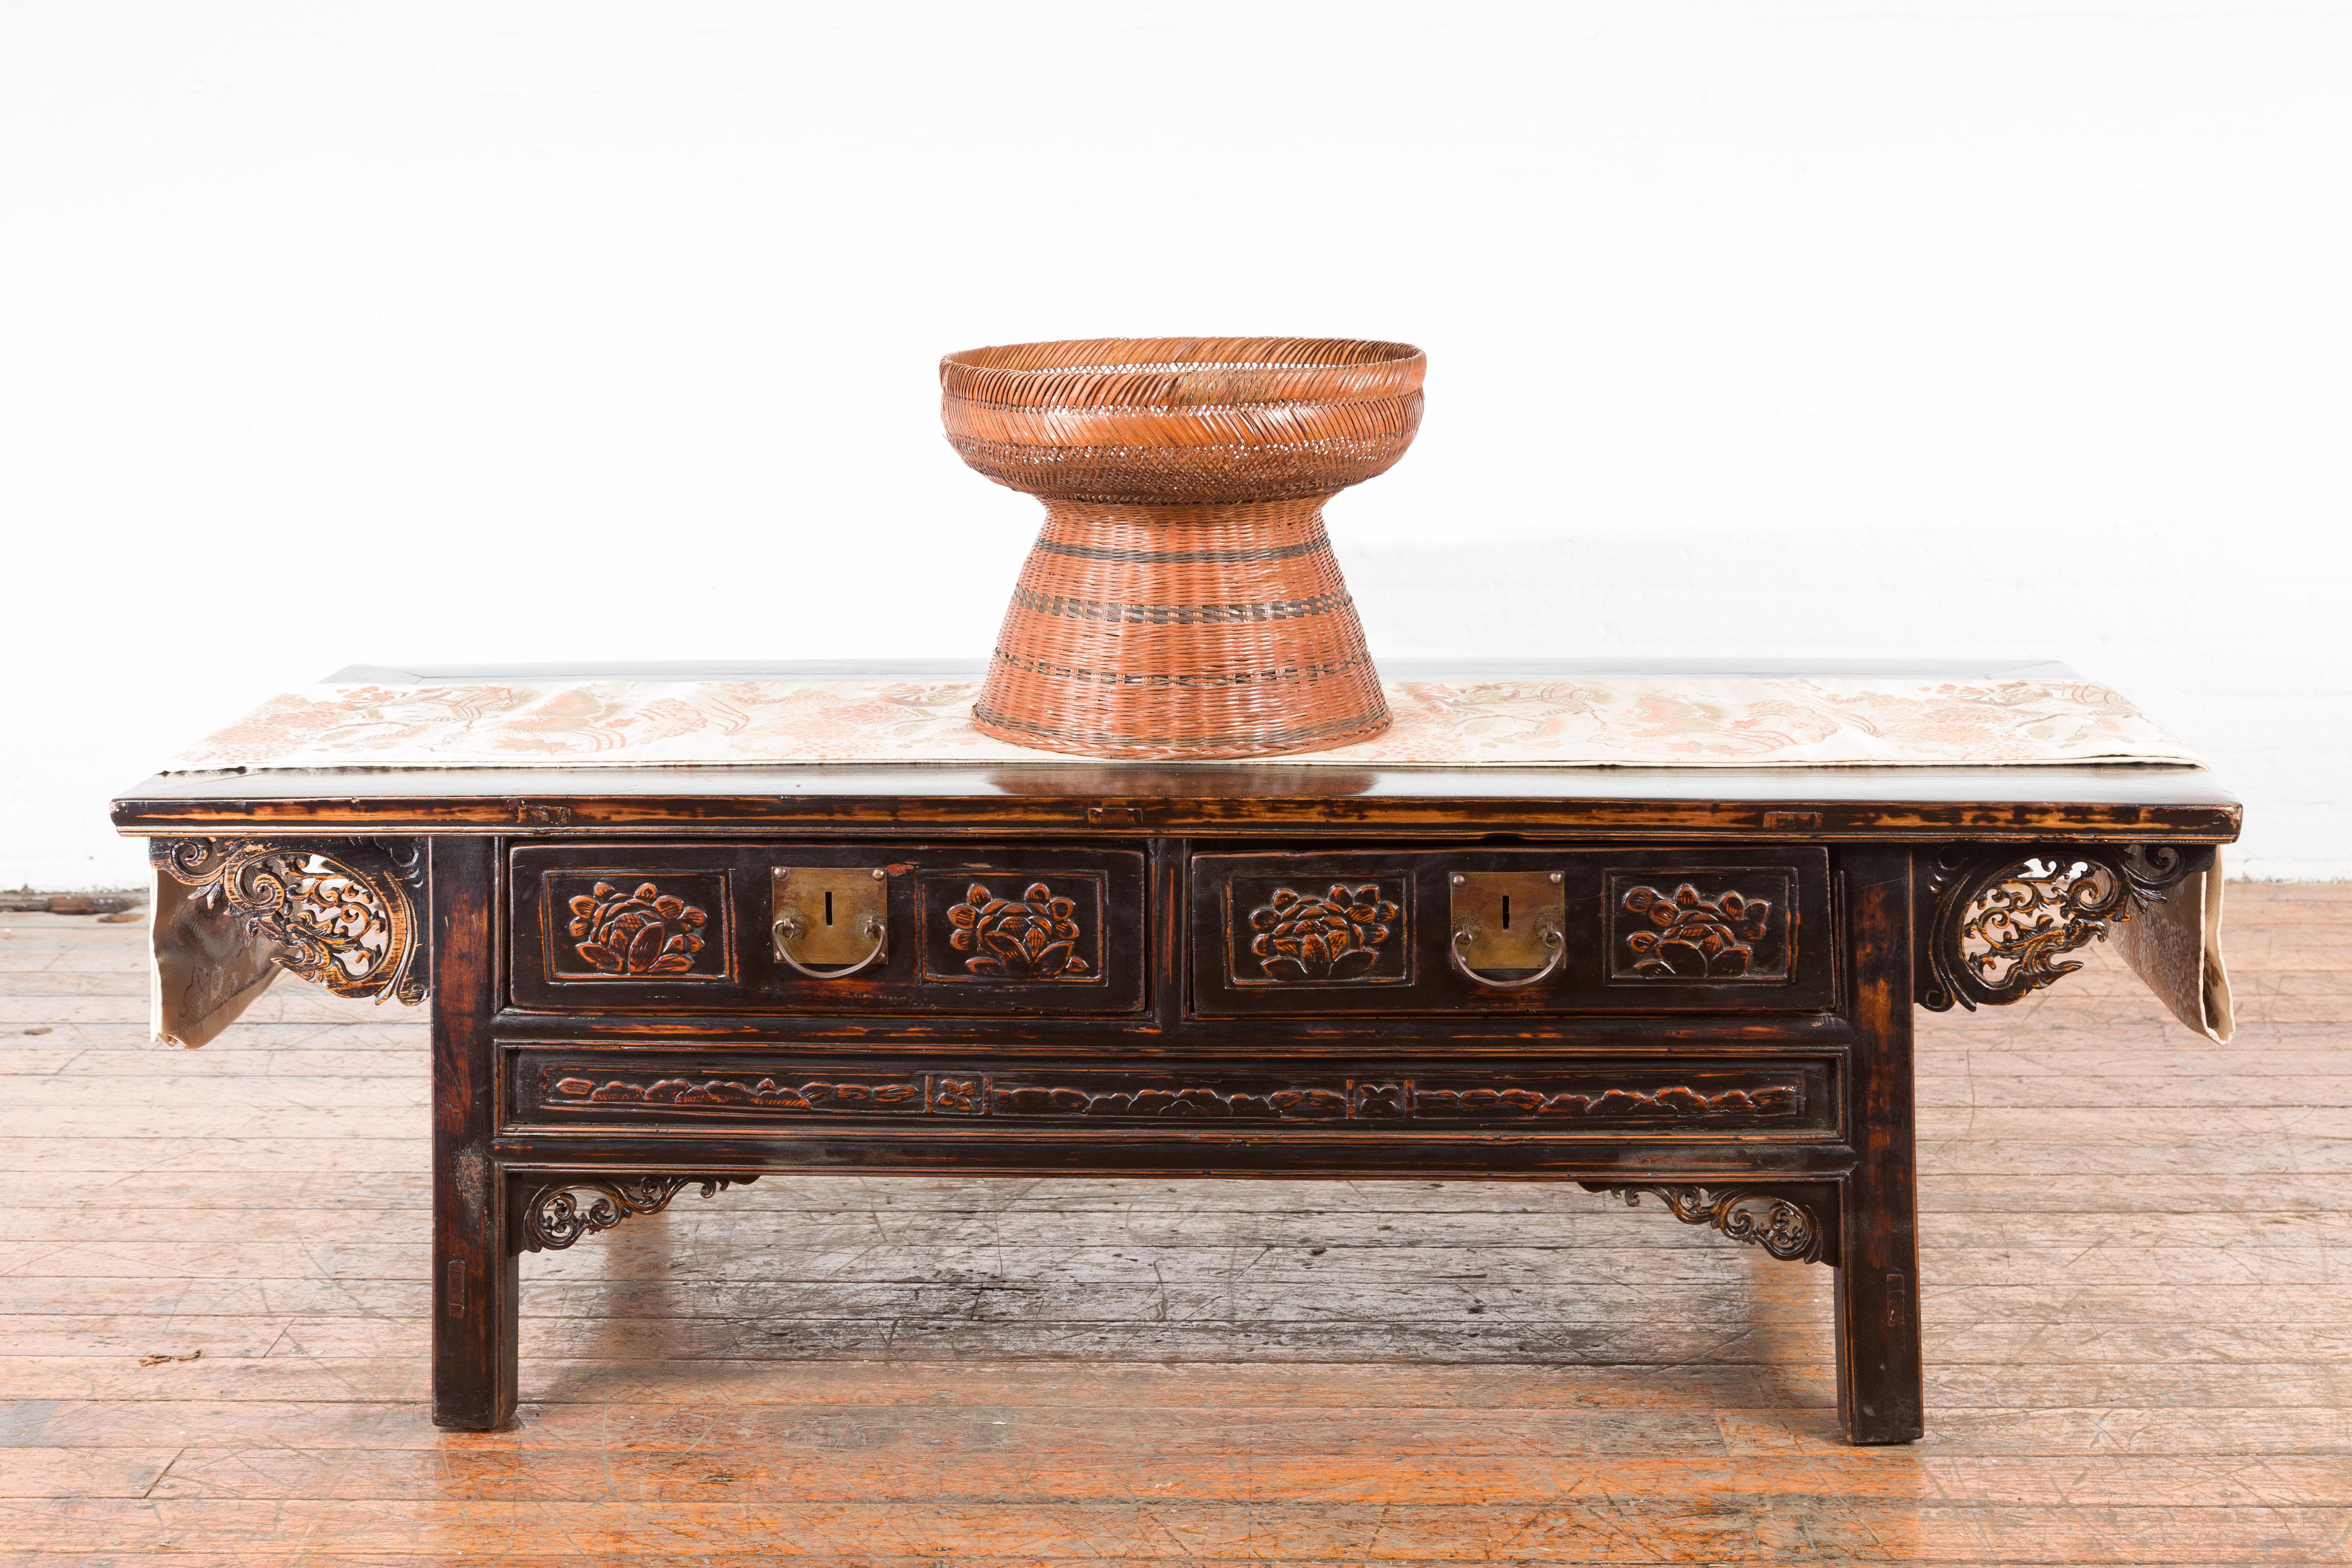 A Thai vintage woven rattan fruit market basket from the mid 20th century, with pedestal base. Created in Thailand during the midcentury period, this market basket features a deep circular top sitting above a nicely tapering pedestal base adorned